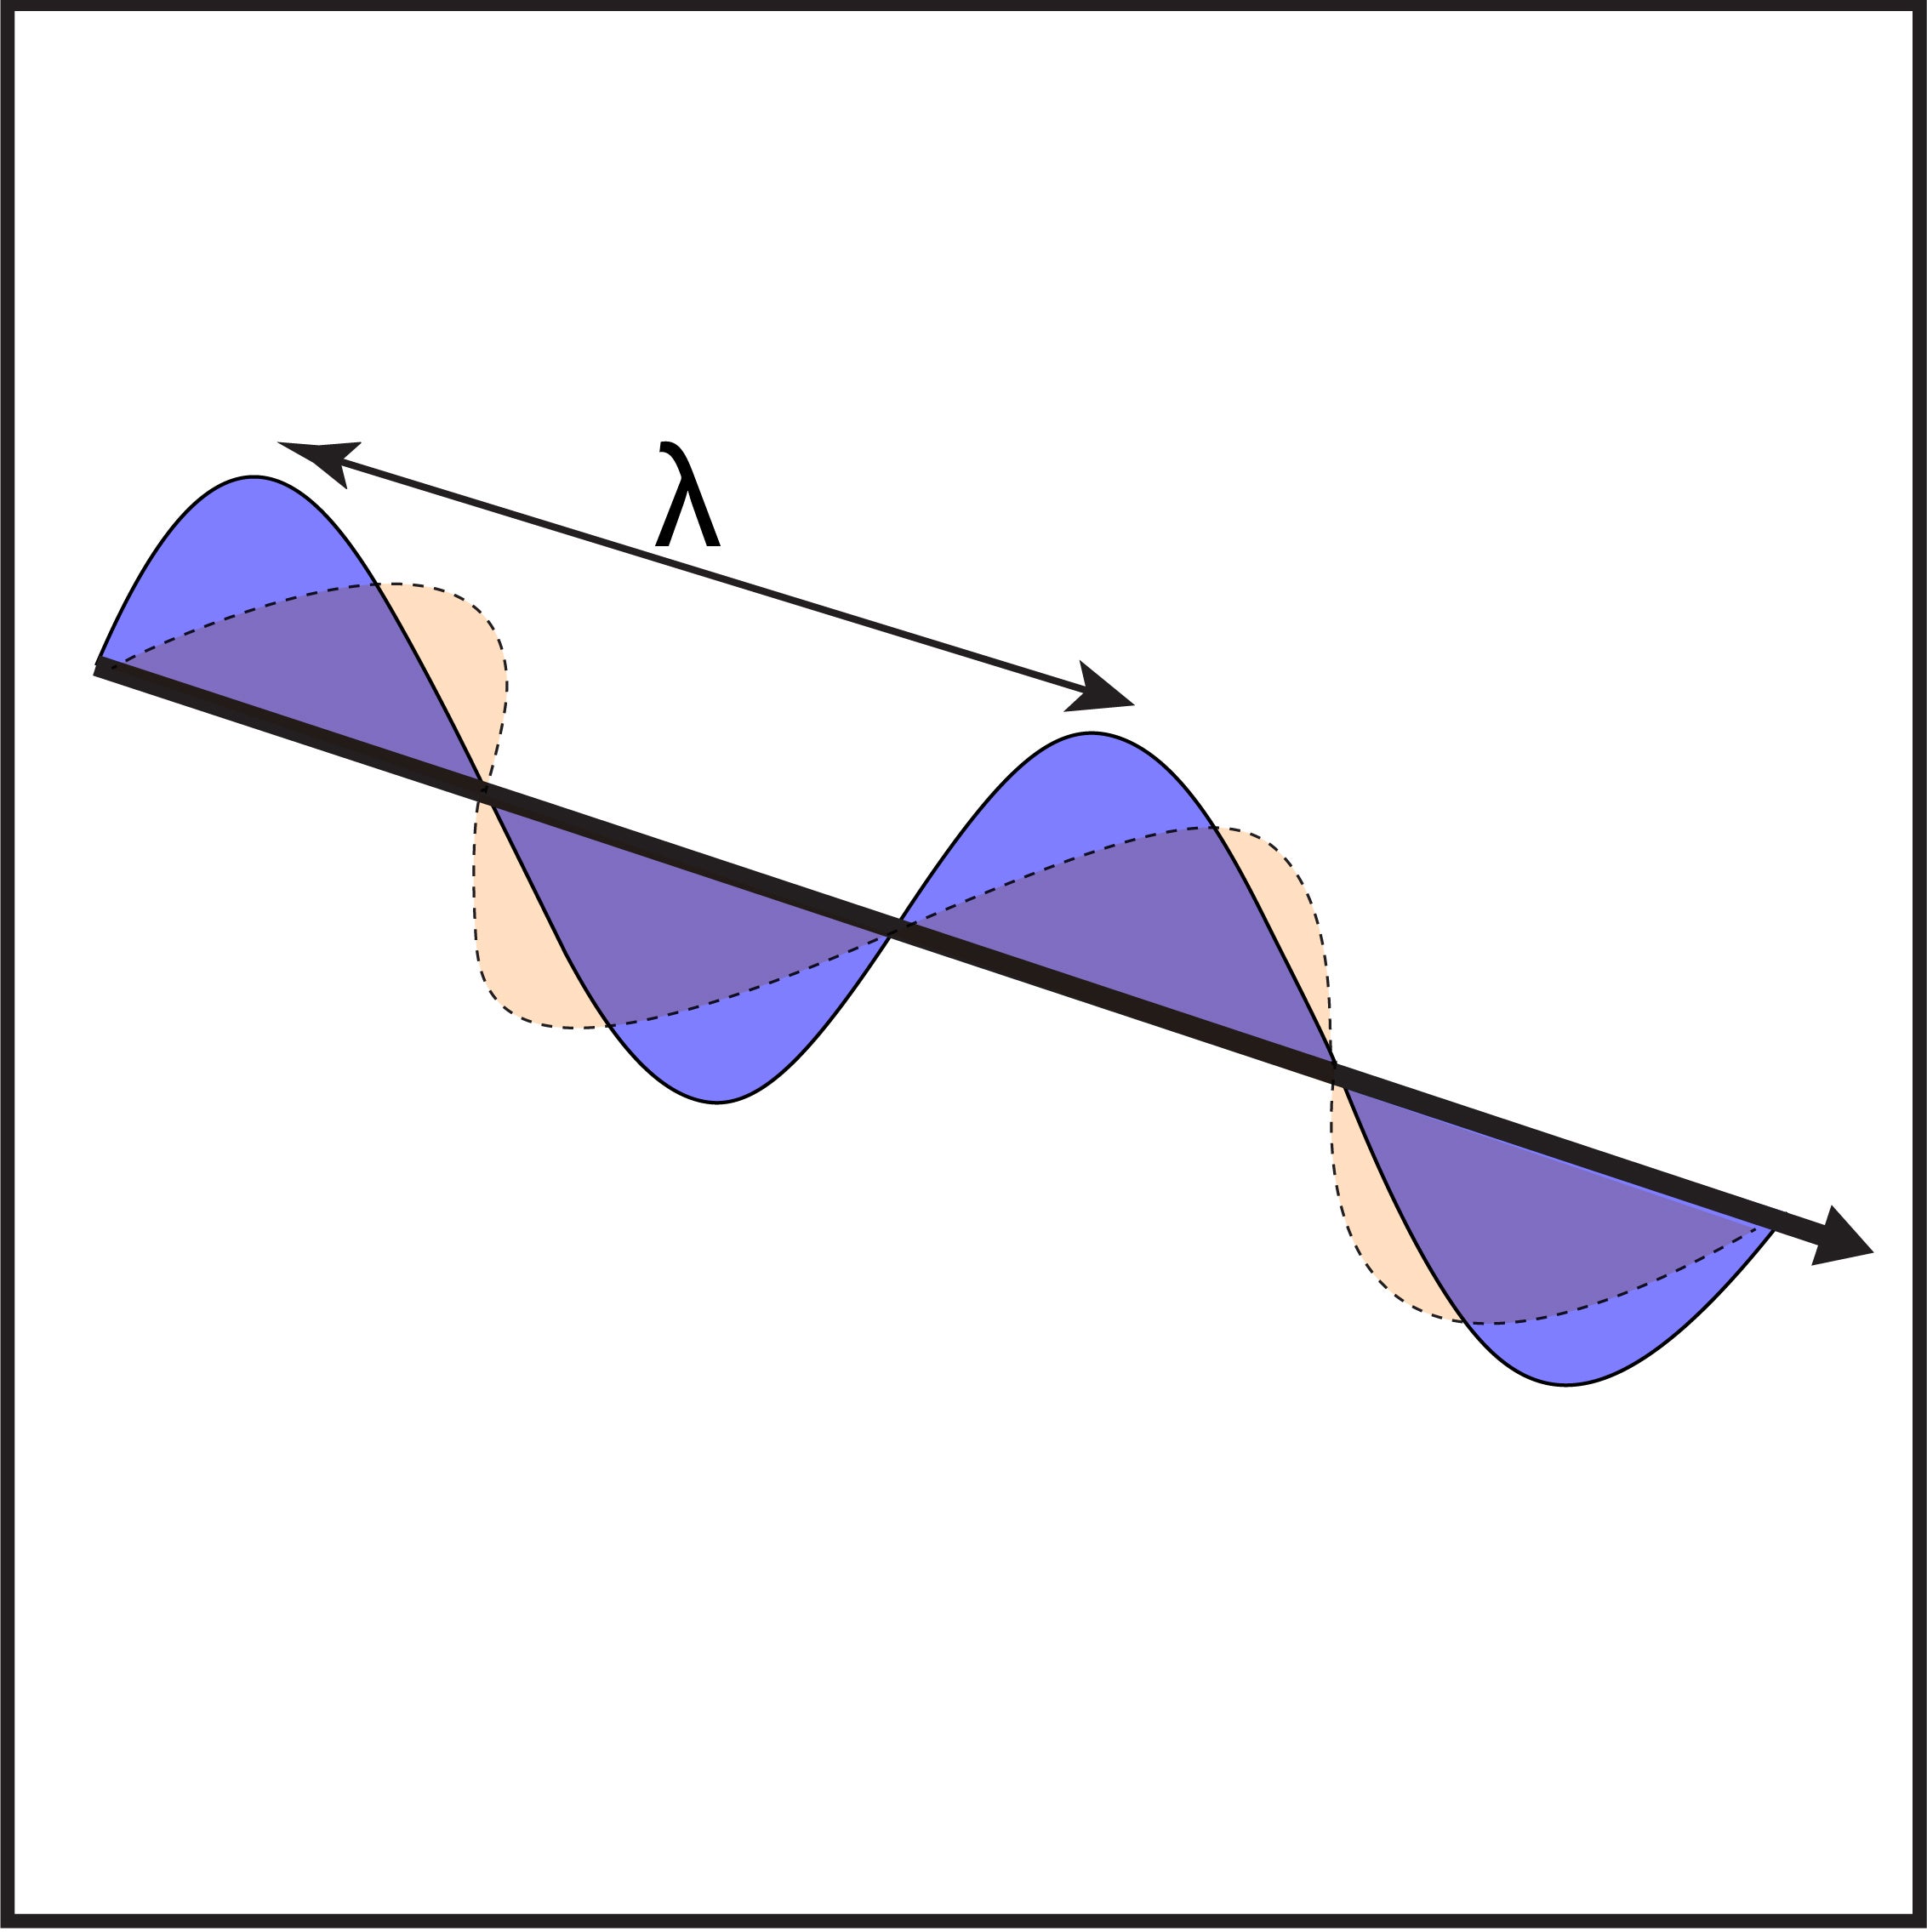 A transverse wave with wavelength λ